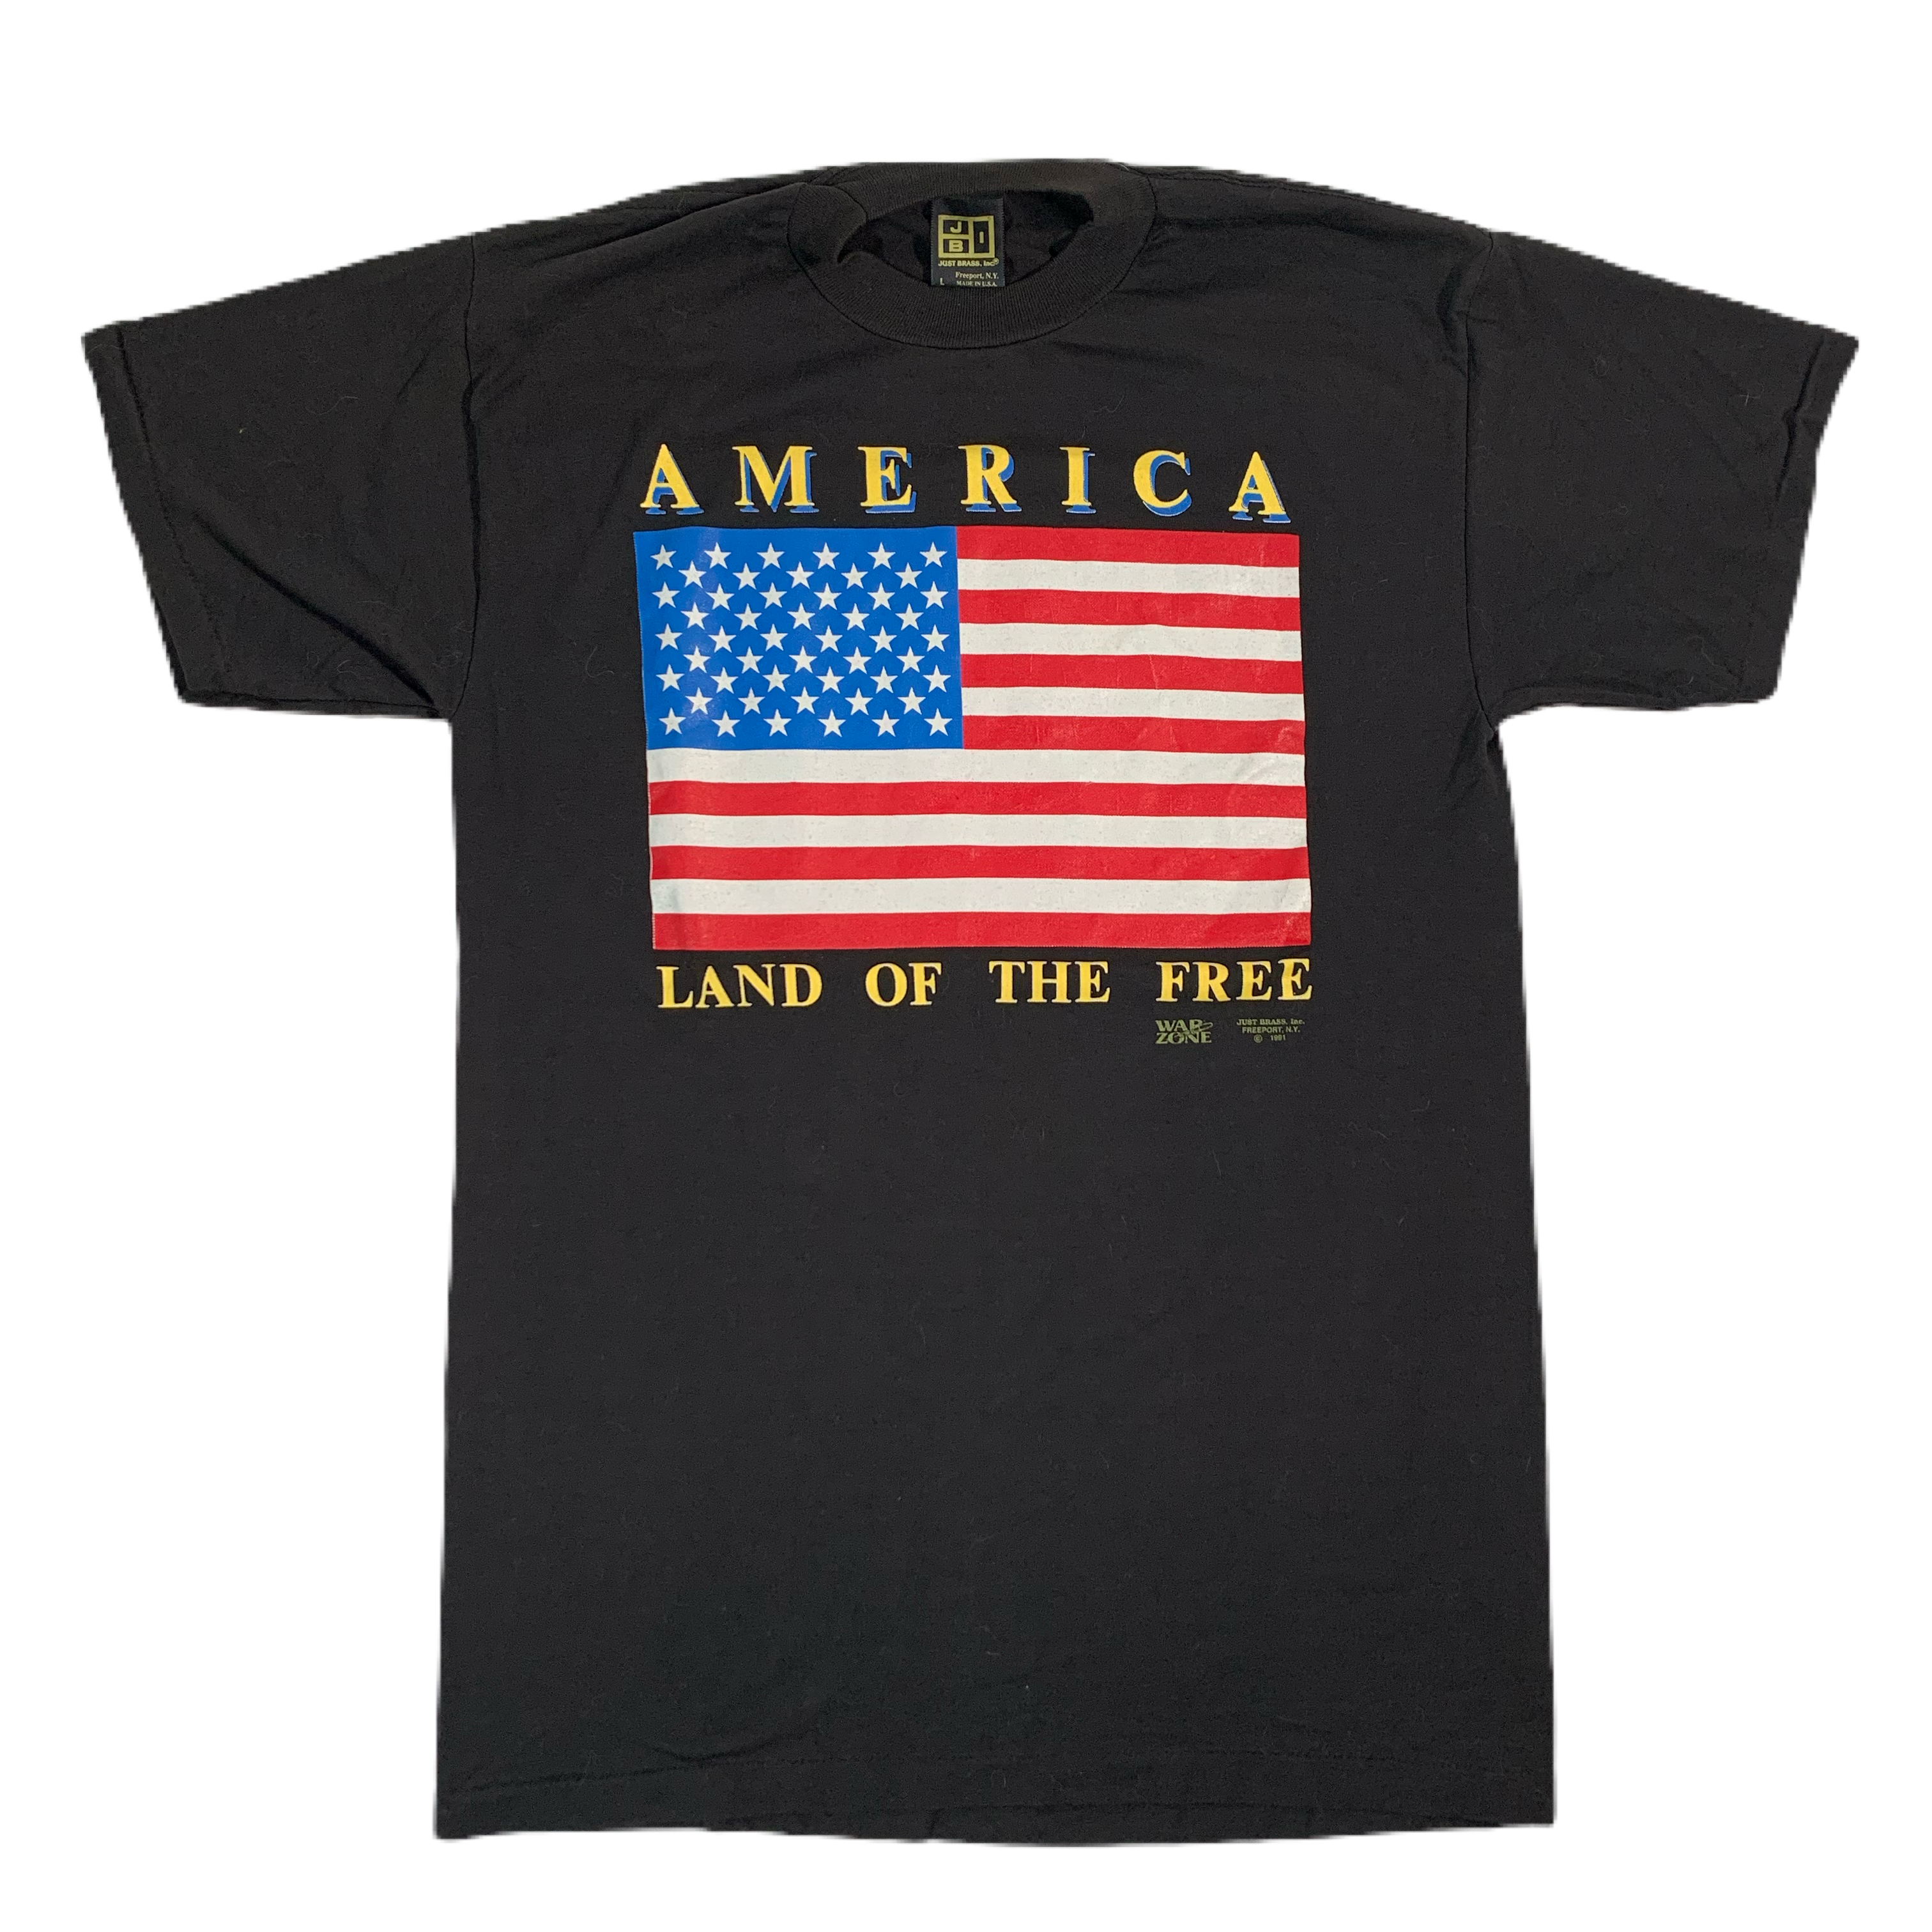 Vintage America “Land Of The Free” T-Shirt